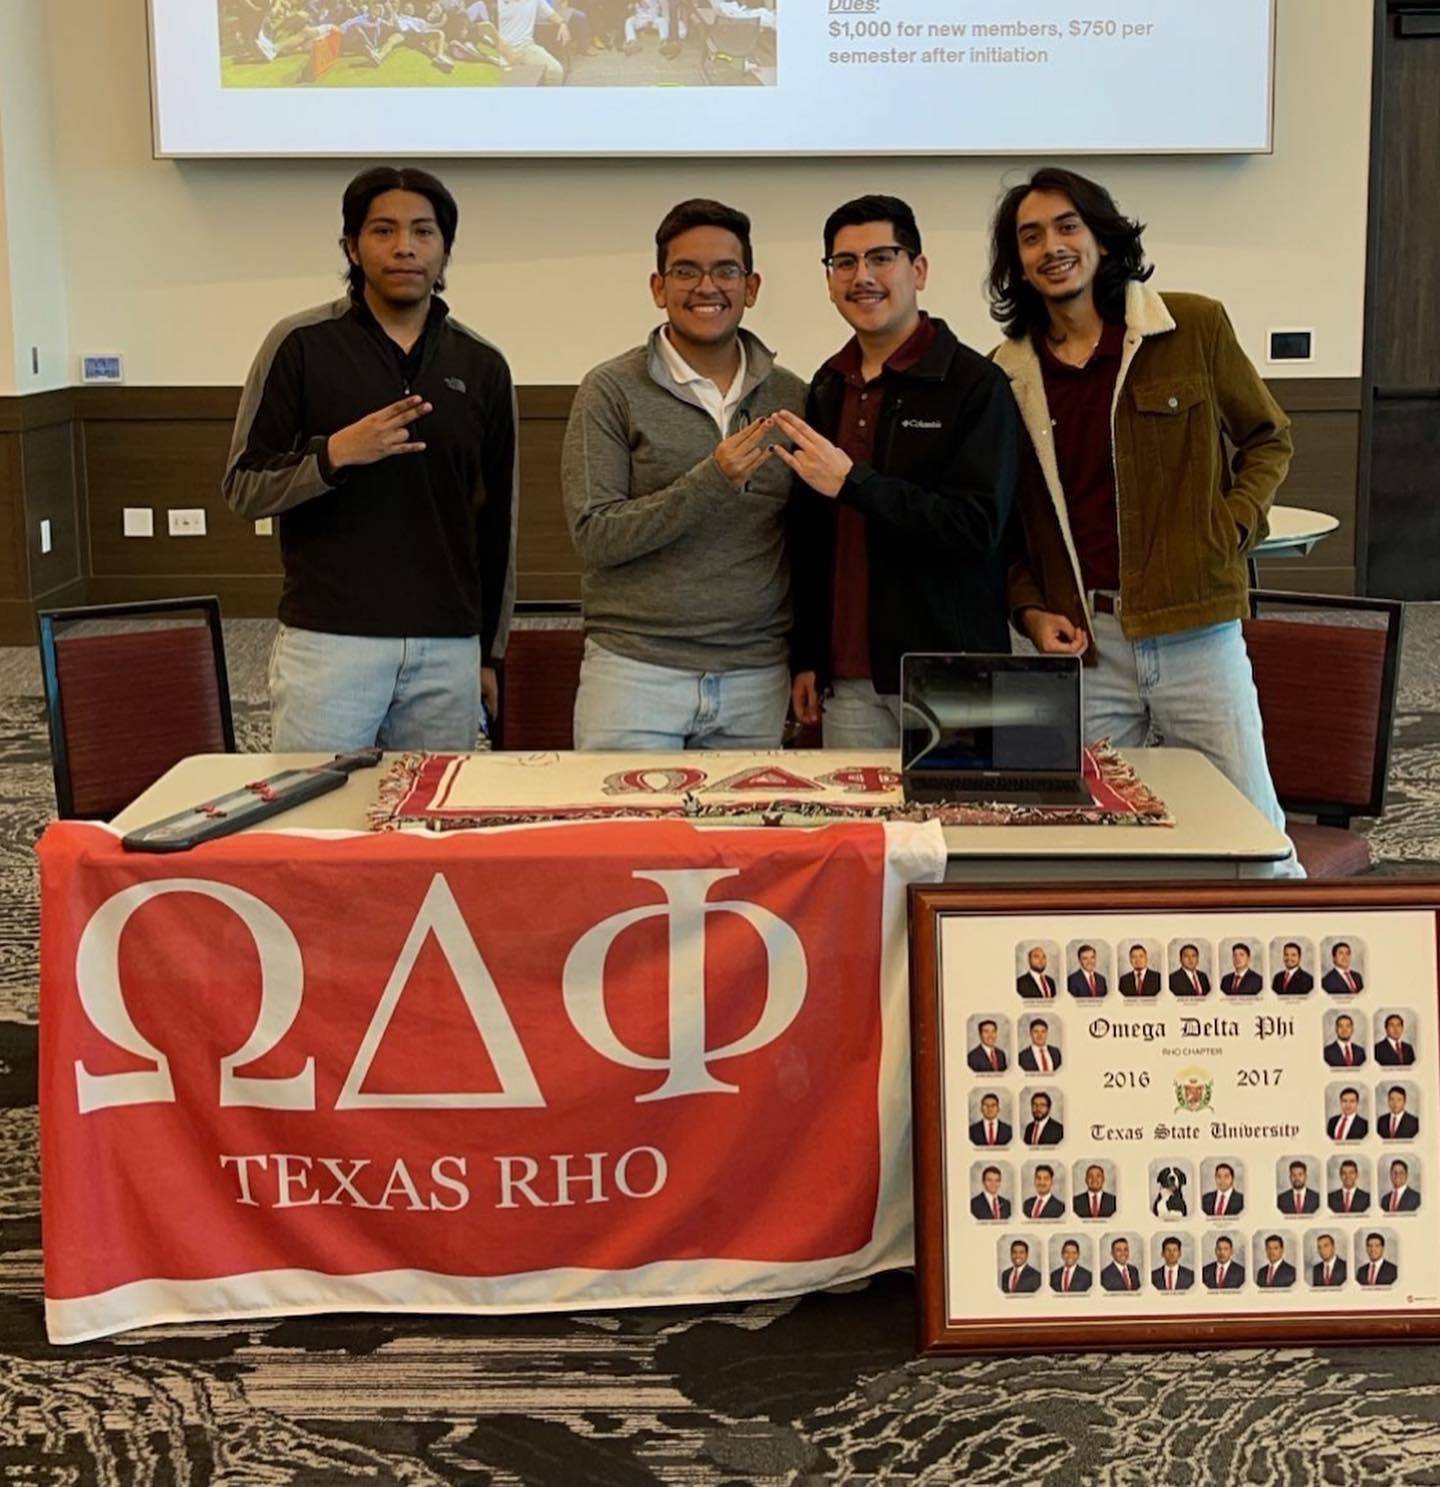 Four men of Omega Delta Phi posing at a table featuring their organization's flag and composite photo